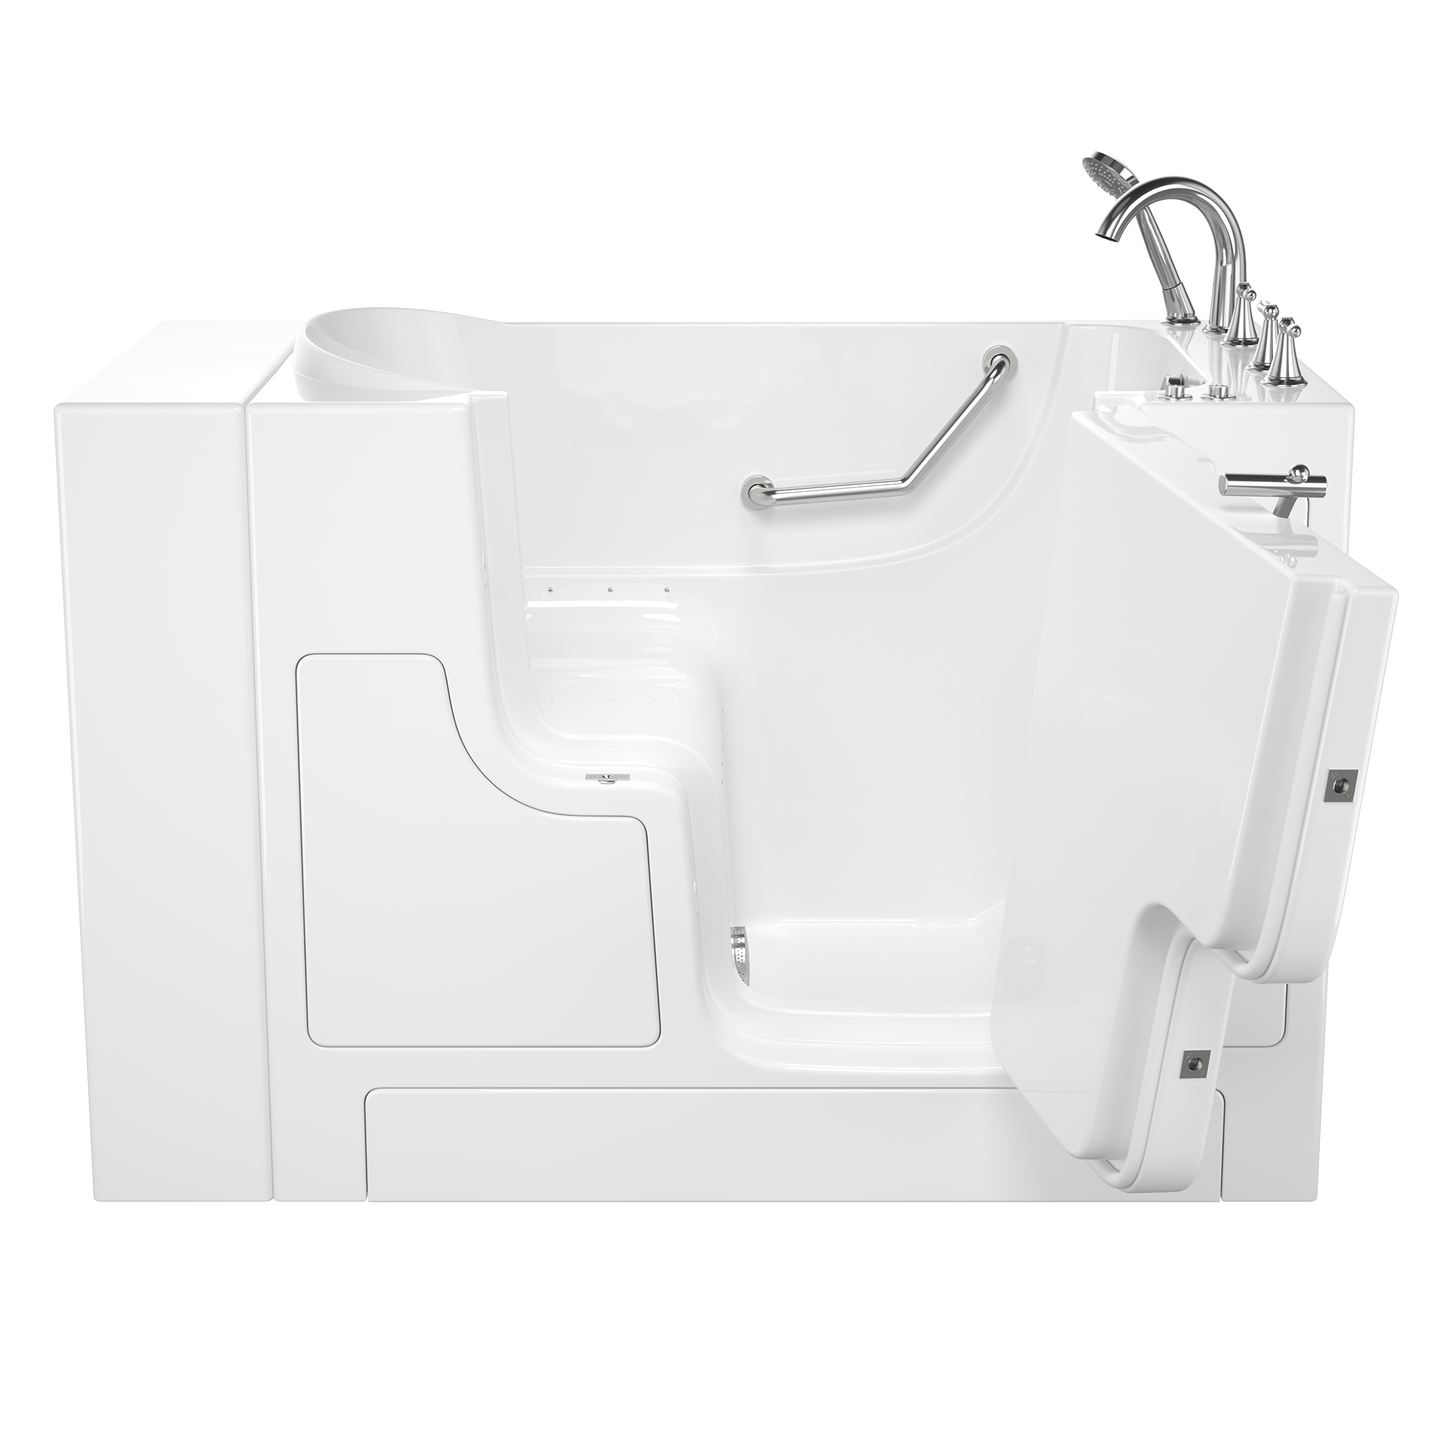 AMERICAN-STANDARD SS9OD5230RA-WH-PC, Gelcoat Premium Series 30 in. x 52 in. Outward Opening Door Walk-In Bathtub with Air Spa system in Wib White